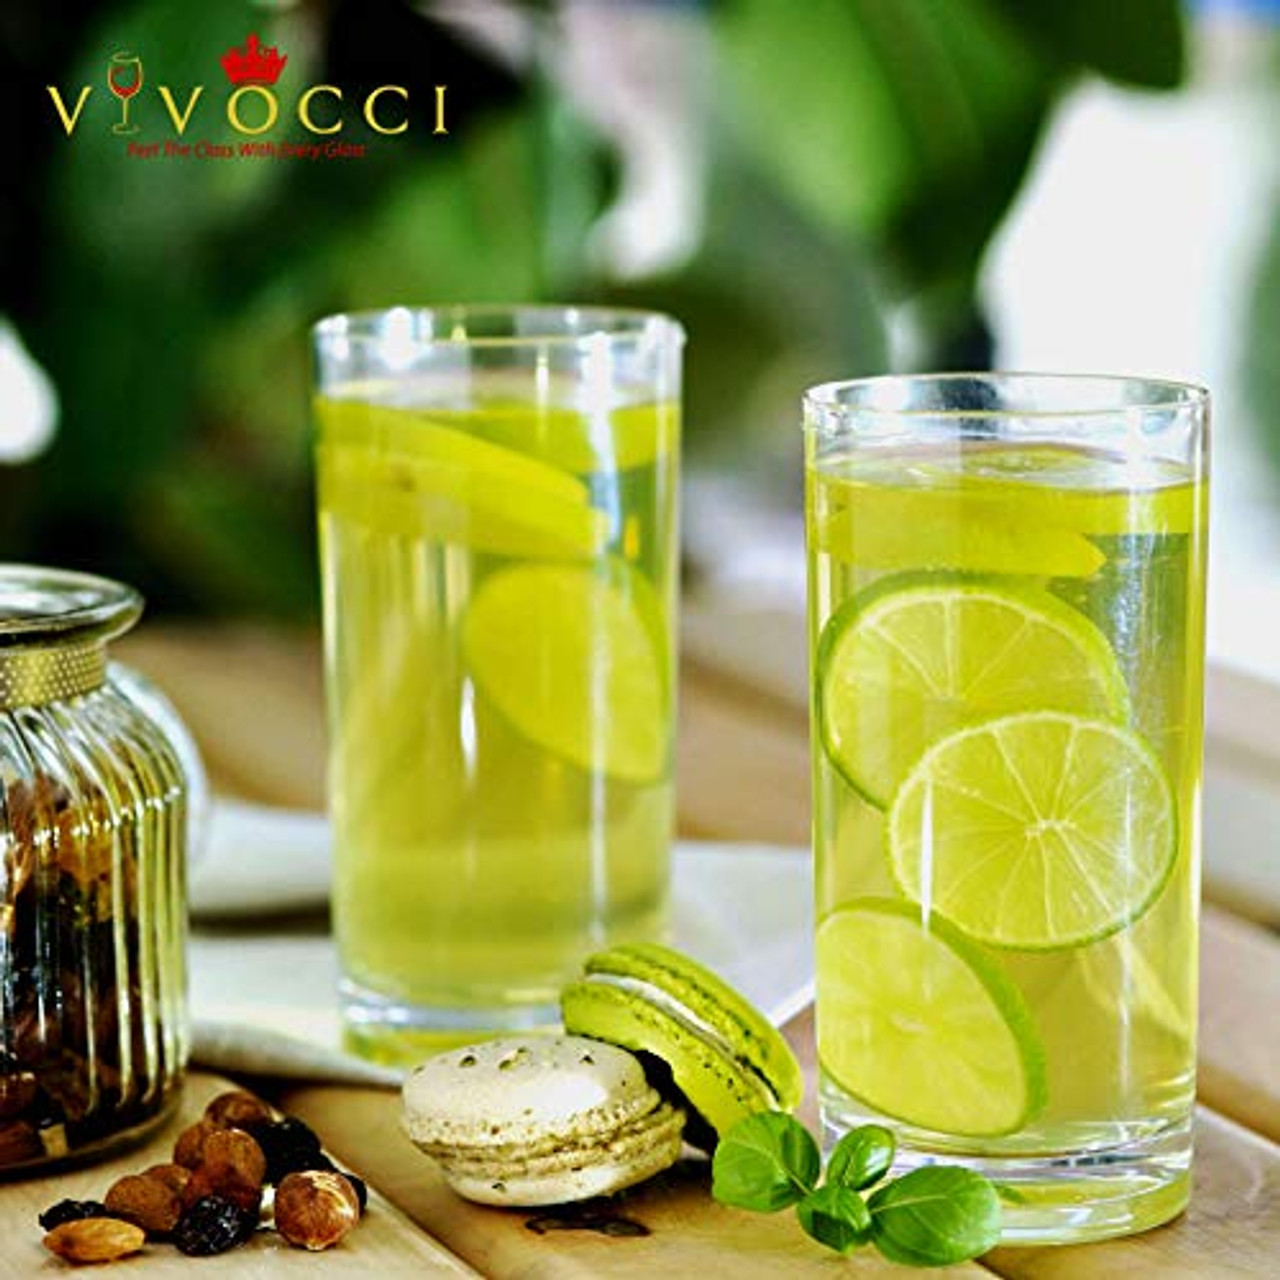 Vivocci Unbreakable Tritan Plastic Water Drinking Glasses 16 oz, Ideal for  Juice Beverages & Cocktails, Shatterproof Barware, Highball Tall Clear  Cup Tumblers, Dishwasher Safe Drinkware